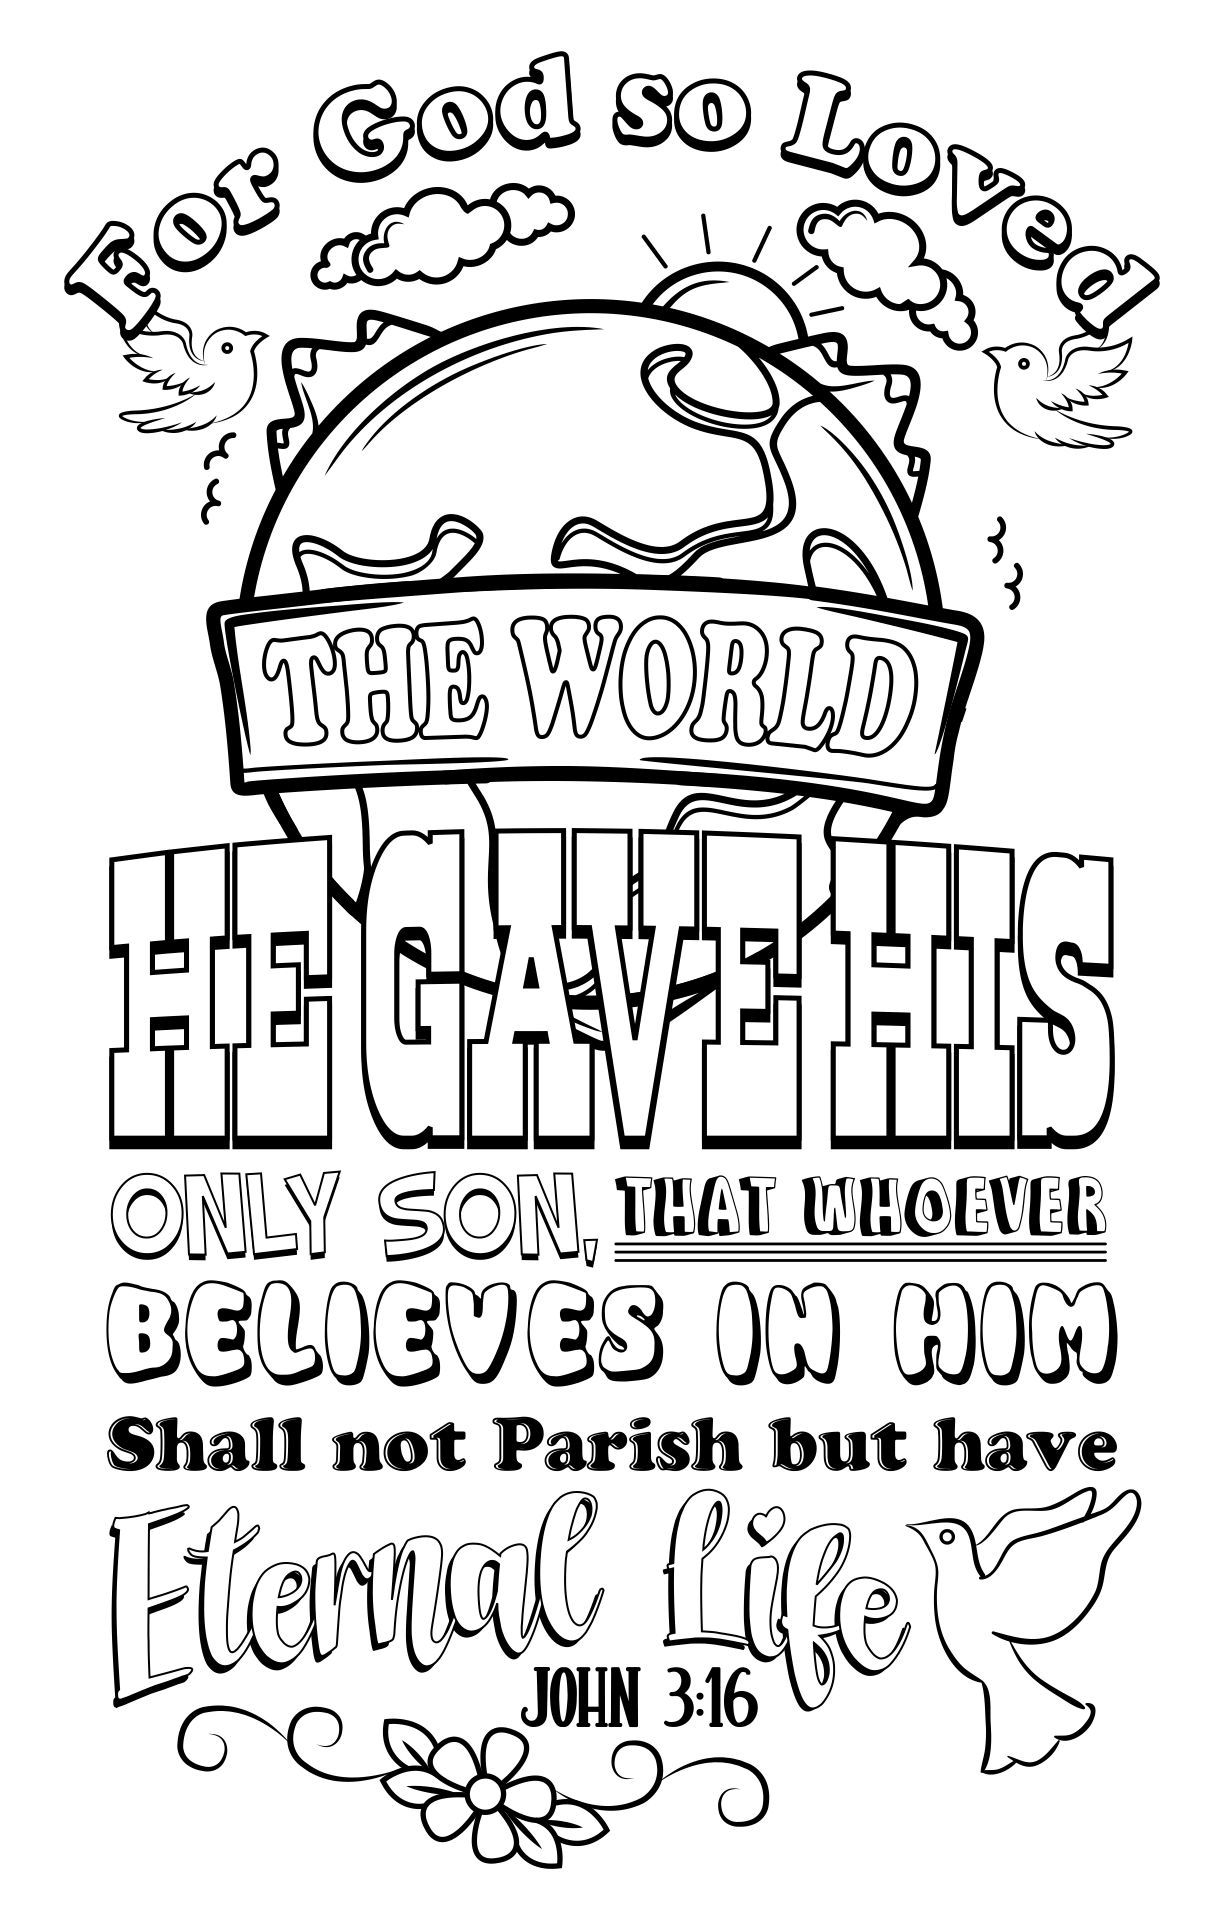 10 Best Printable Coloring Page With John 3 16 PDF For Free At Printablee Bible Verse Coloring Page Bible Verse Coloring Bible Verses